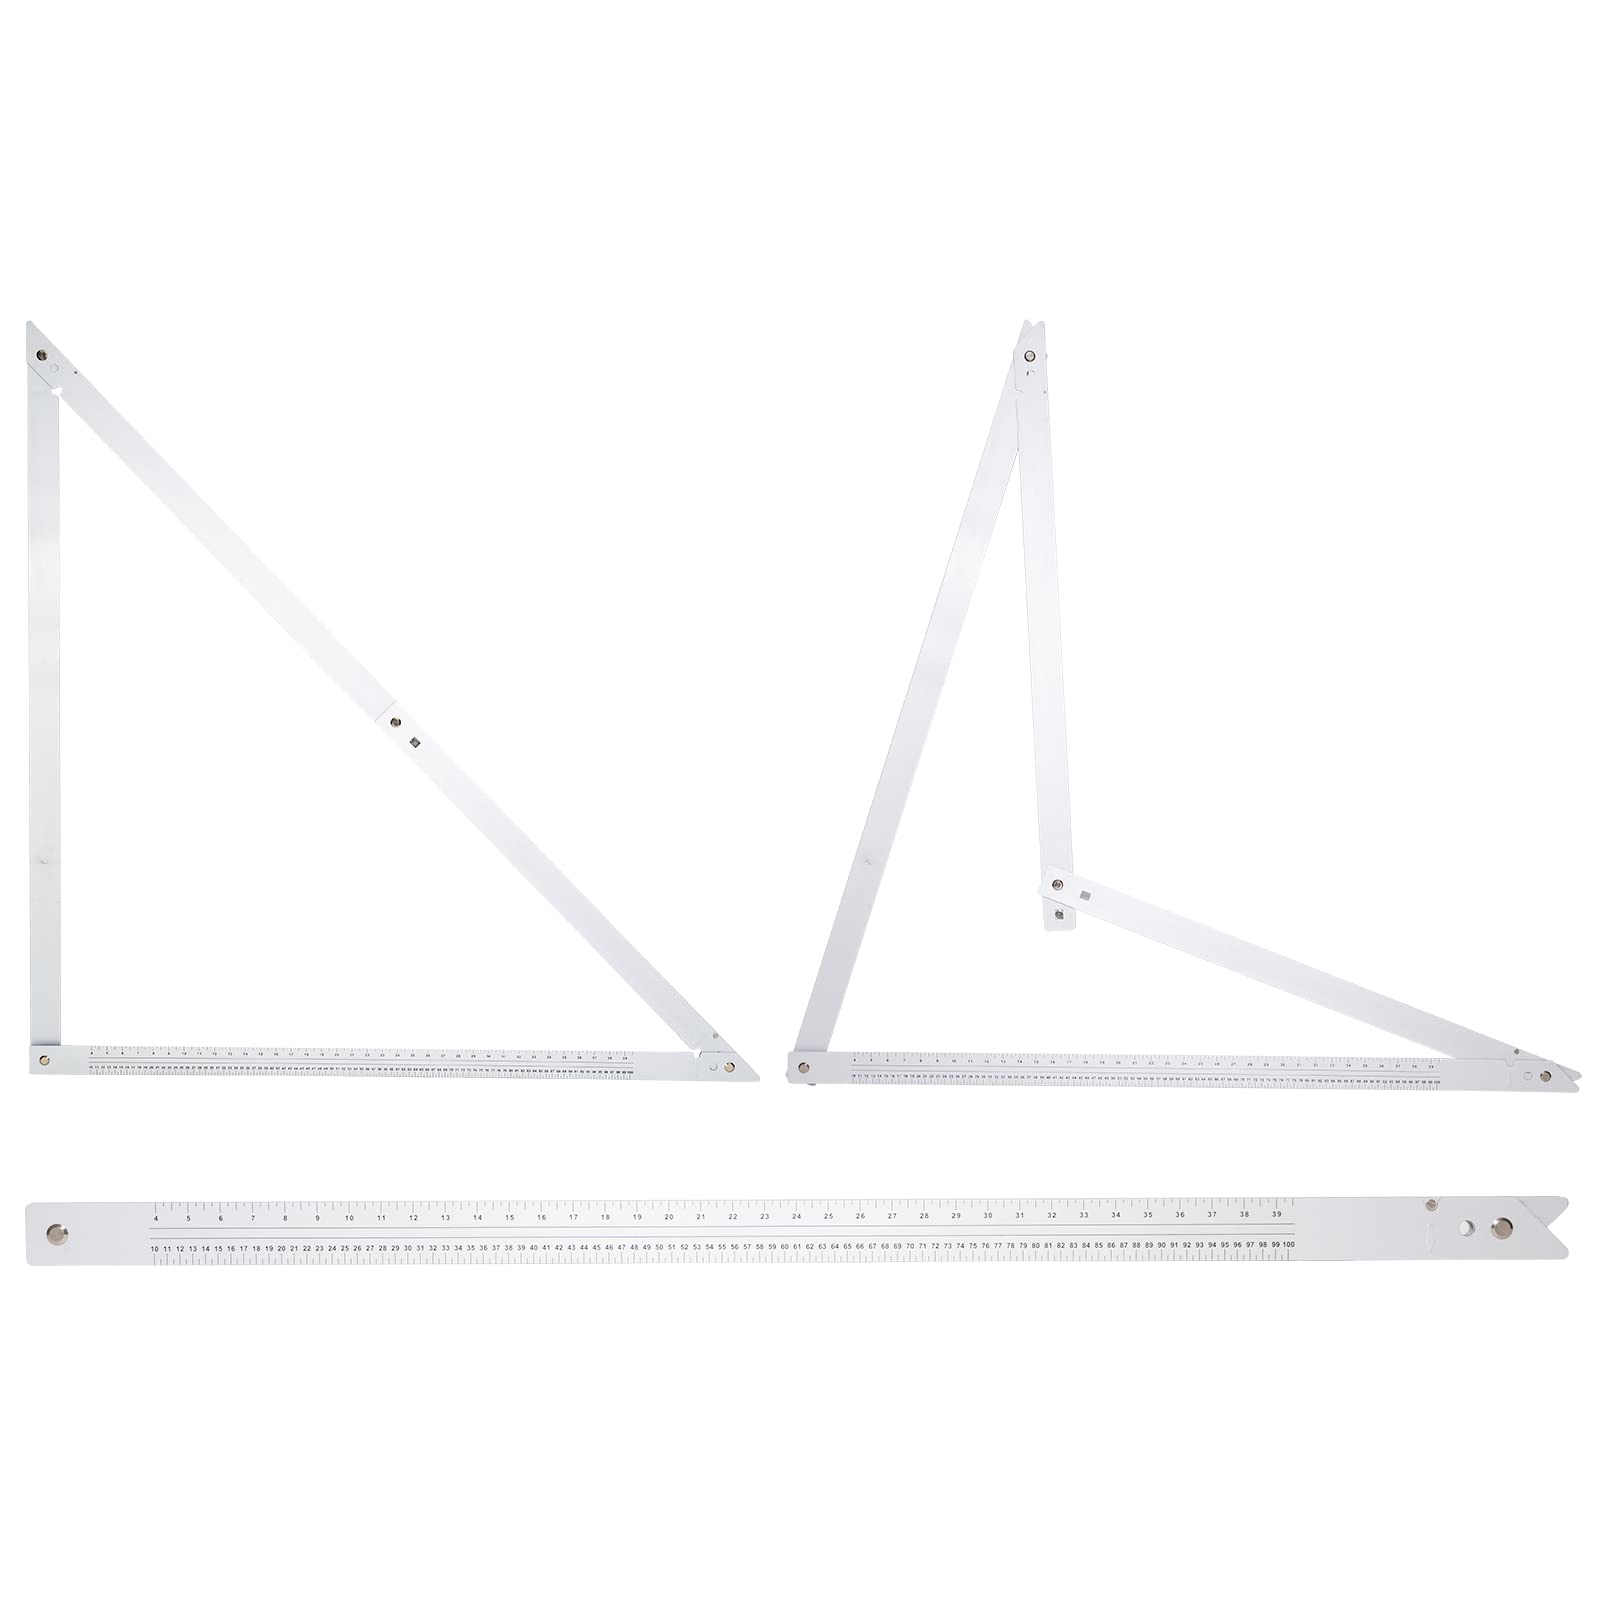 PENGZHAN Combination Square for Carpenter Tools 48 Inch Folding Aluminum Triangle Ruler Construction Framing Tool Woodworking Foldable Frame Measurement Angle Rulers